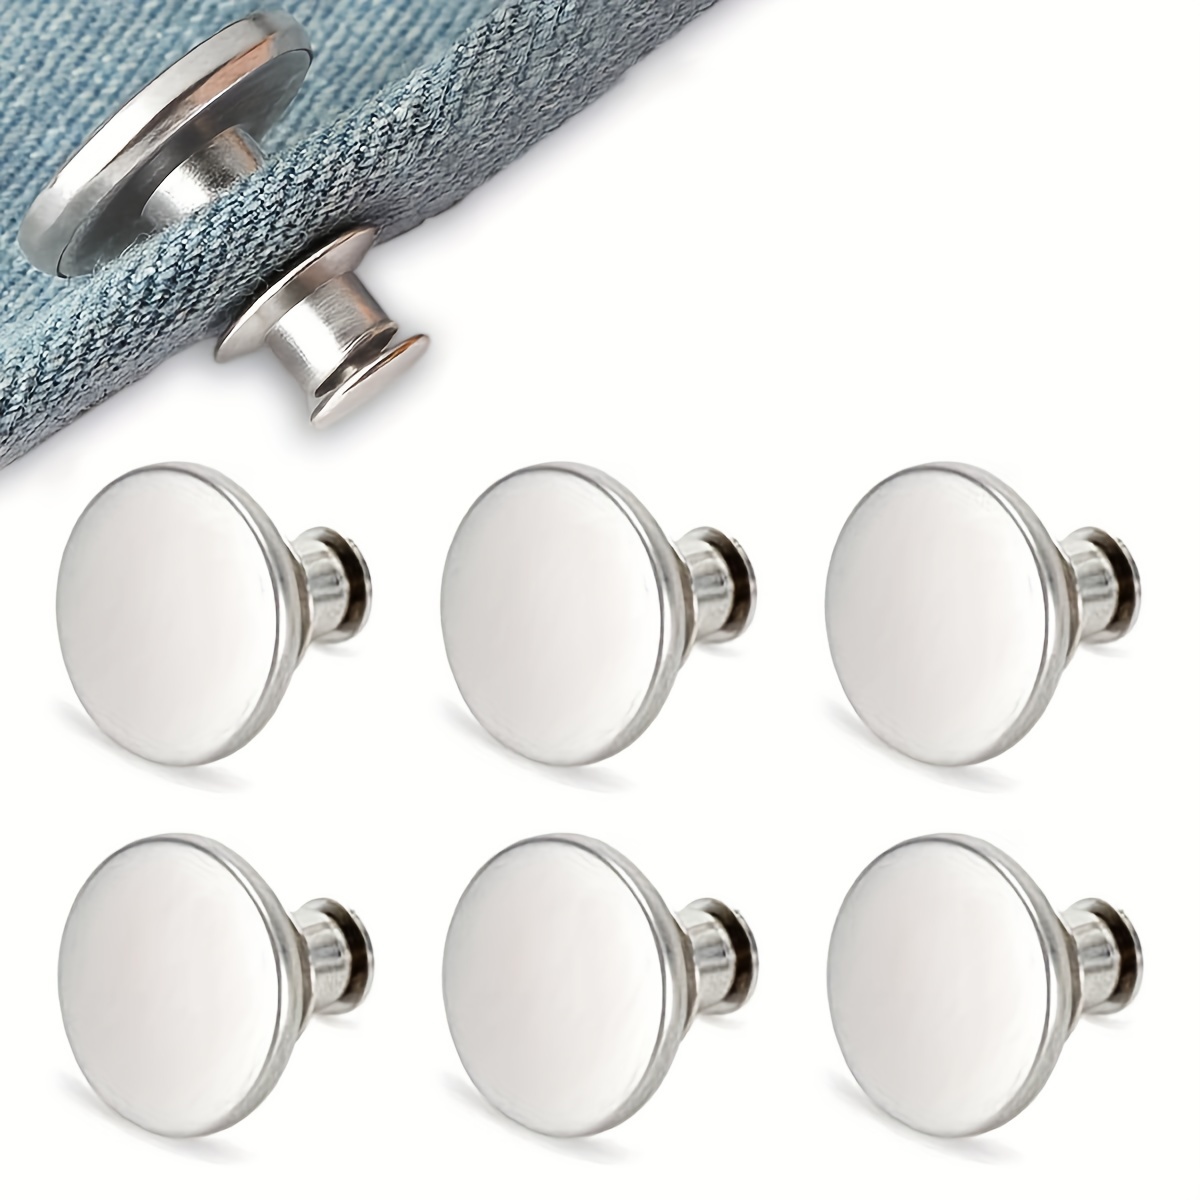 Metal Sewing Buttons Accessories